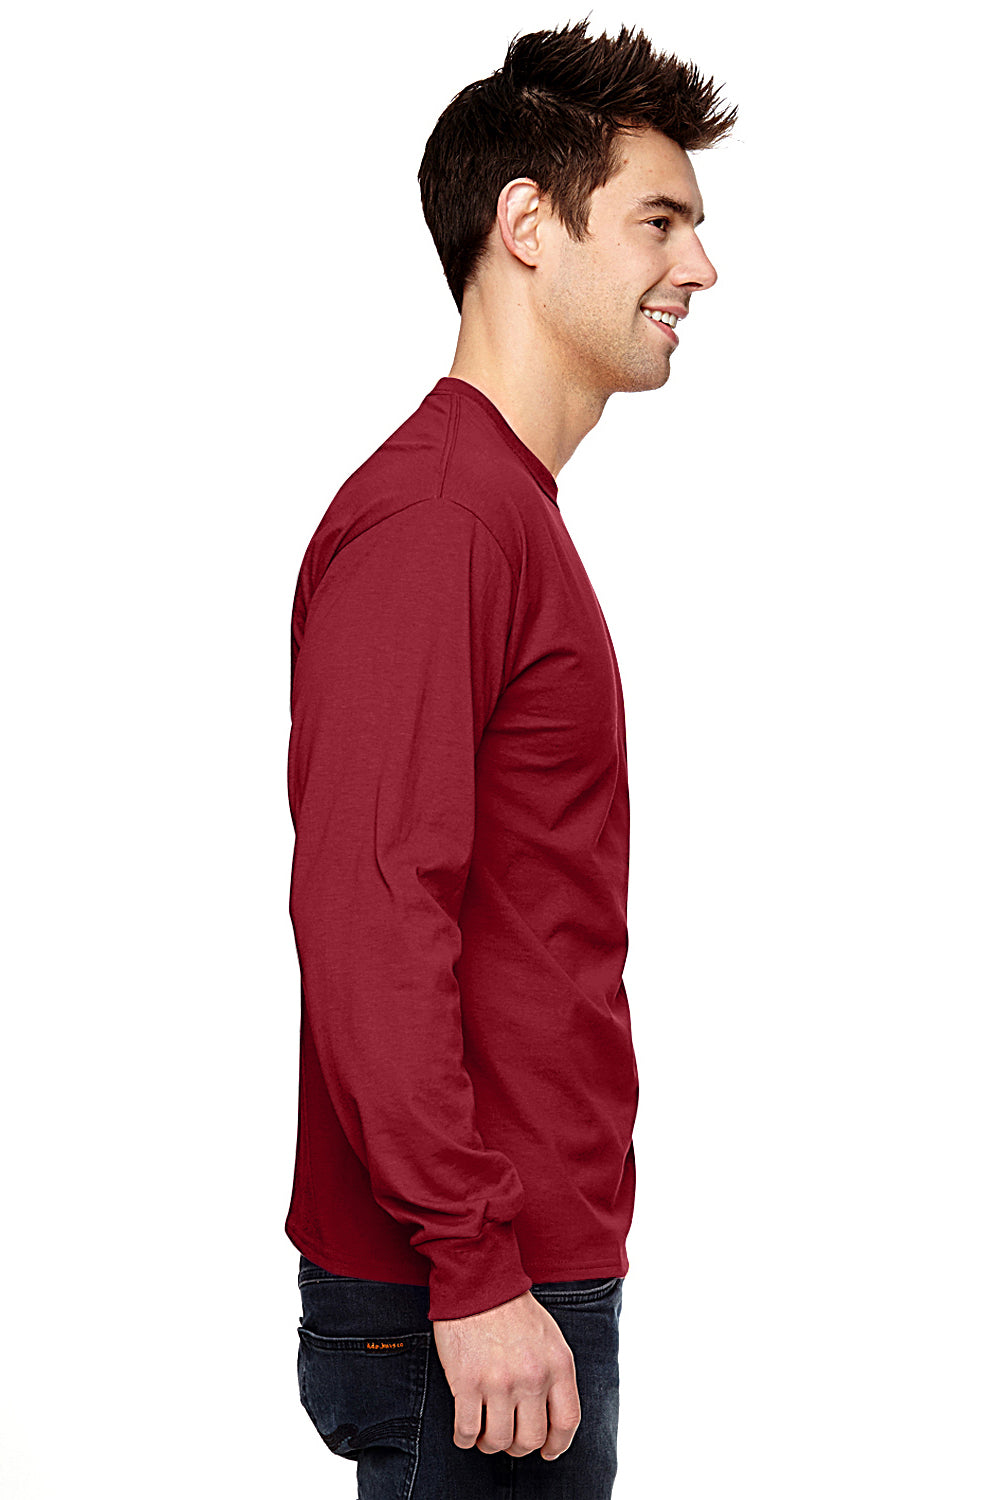 Fruit Of The Loom 4930 Mens HD Jersey Long Sleeve Crewneck T-Shirt Crimson Red Side